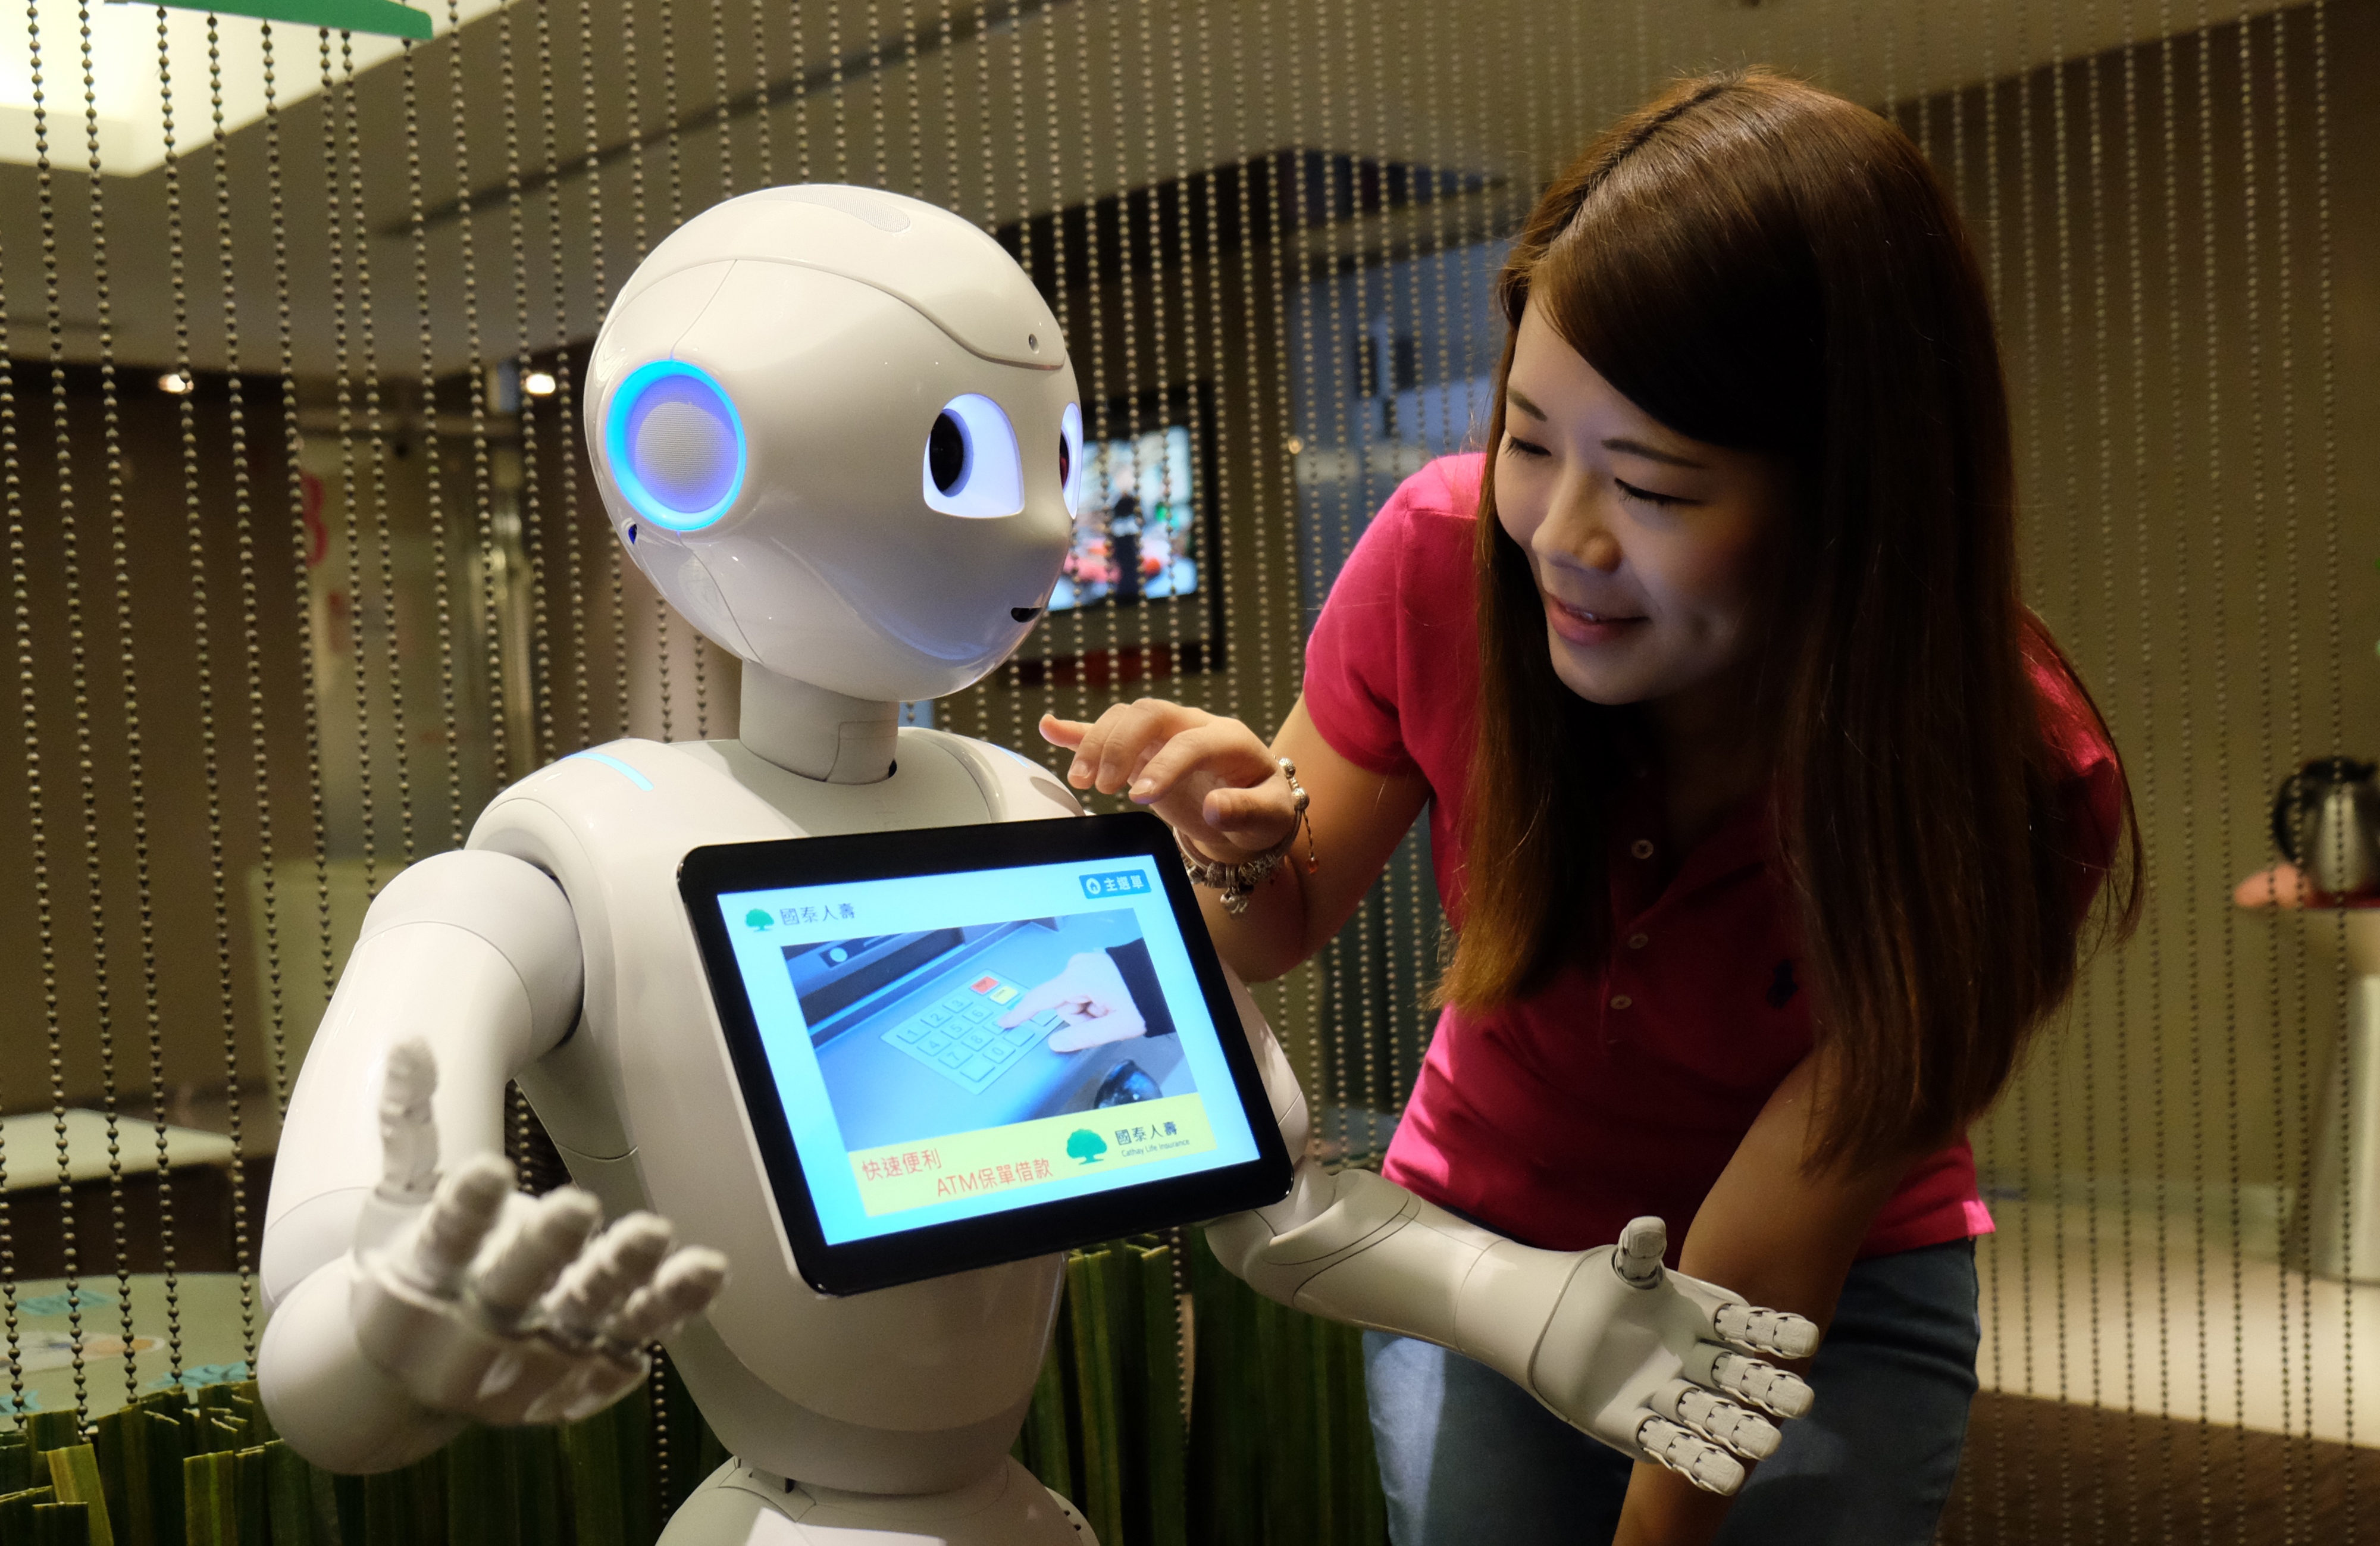 A woman gives a comand to a robot named Pepper during a press conference organized by Cathay Financial Holdings in Taipei on October 6, 2016.  A mini robot called "Pepper" started work alongside human colleagues at banks and an insurance company in Taiwan, enlisted with entertaining bored customers -- and giving them the hard sell. / AFP PHOTO / SAM YEH